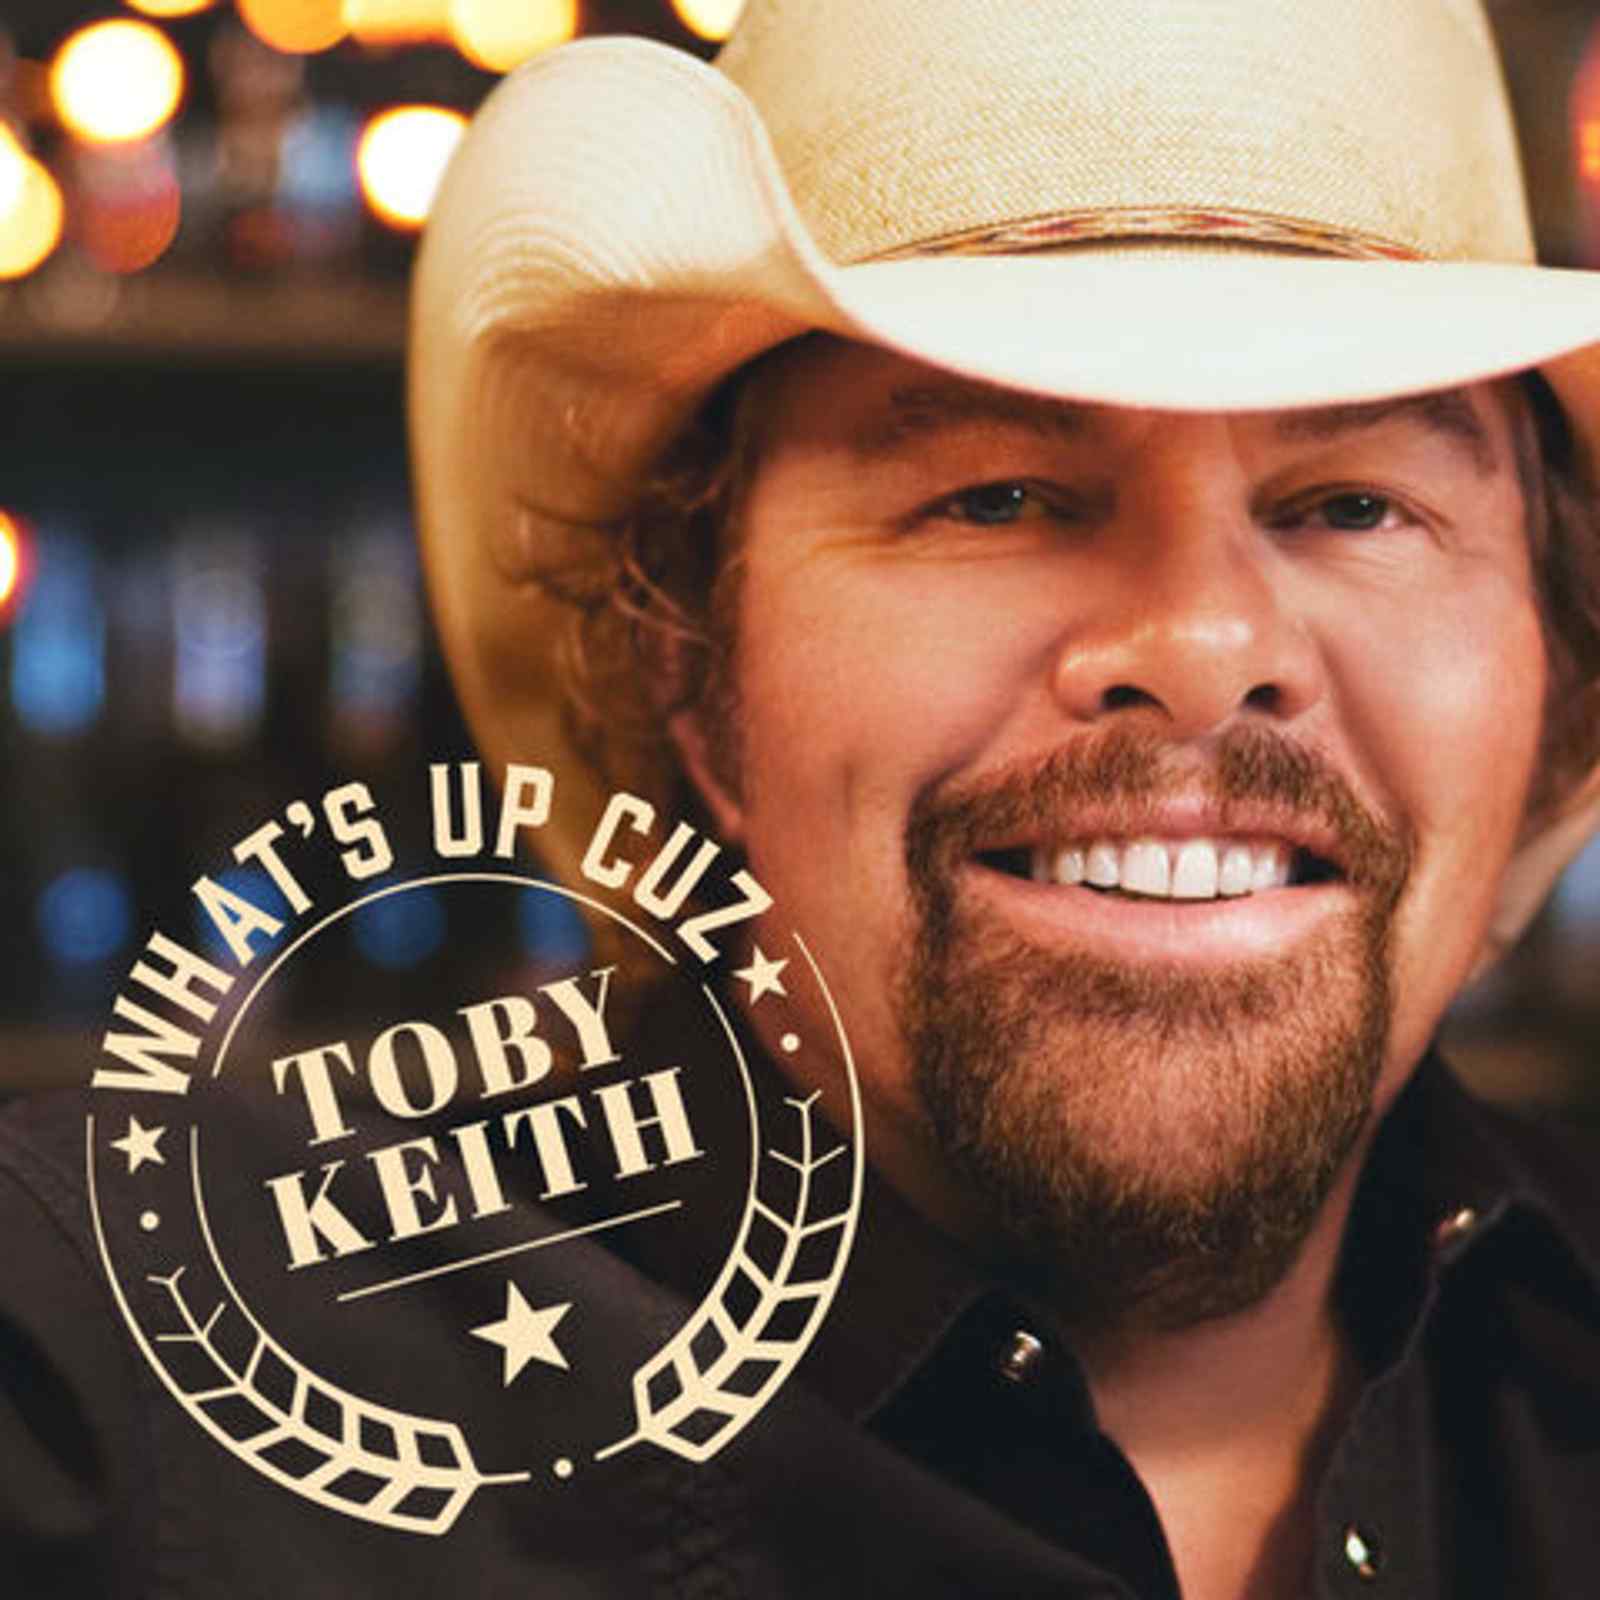 Toby Keith Posts The Furniture Store Guitar Sessions Version Of "As Good As I Once Was"